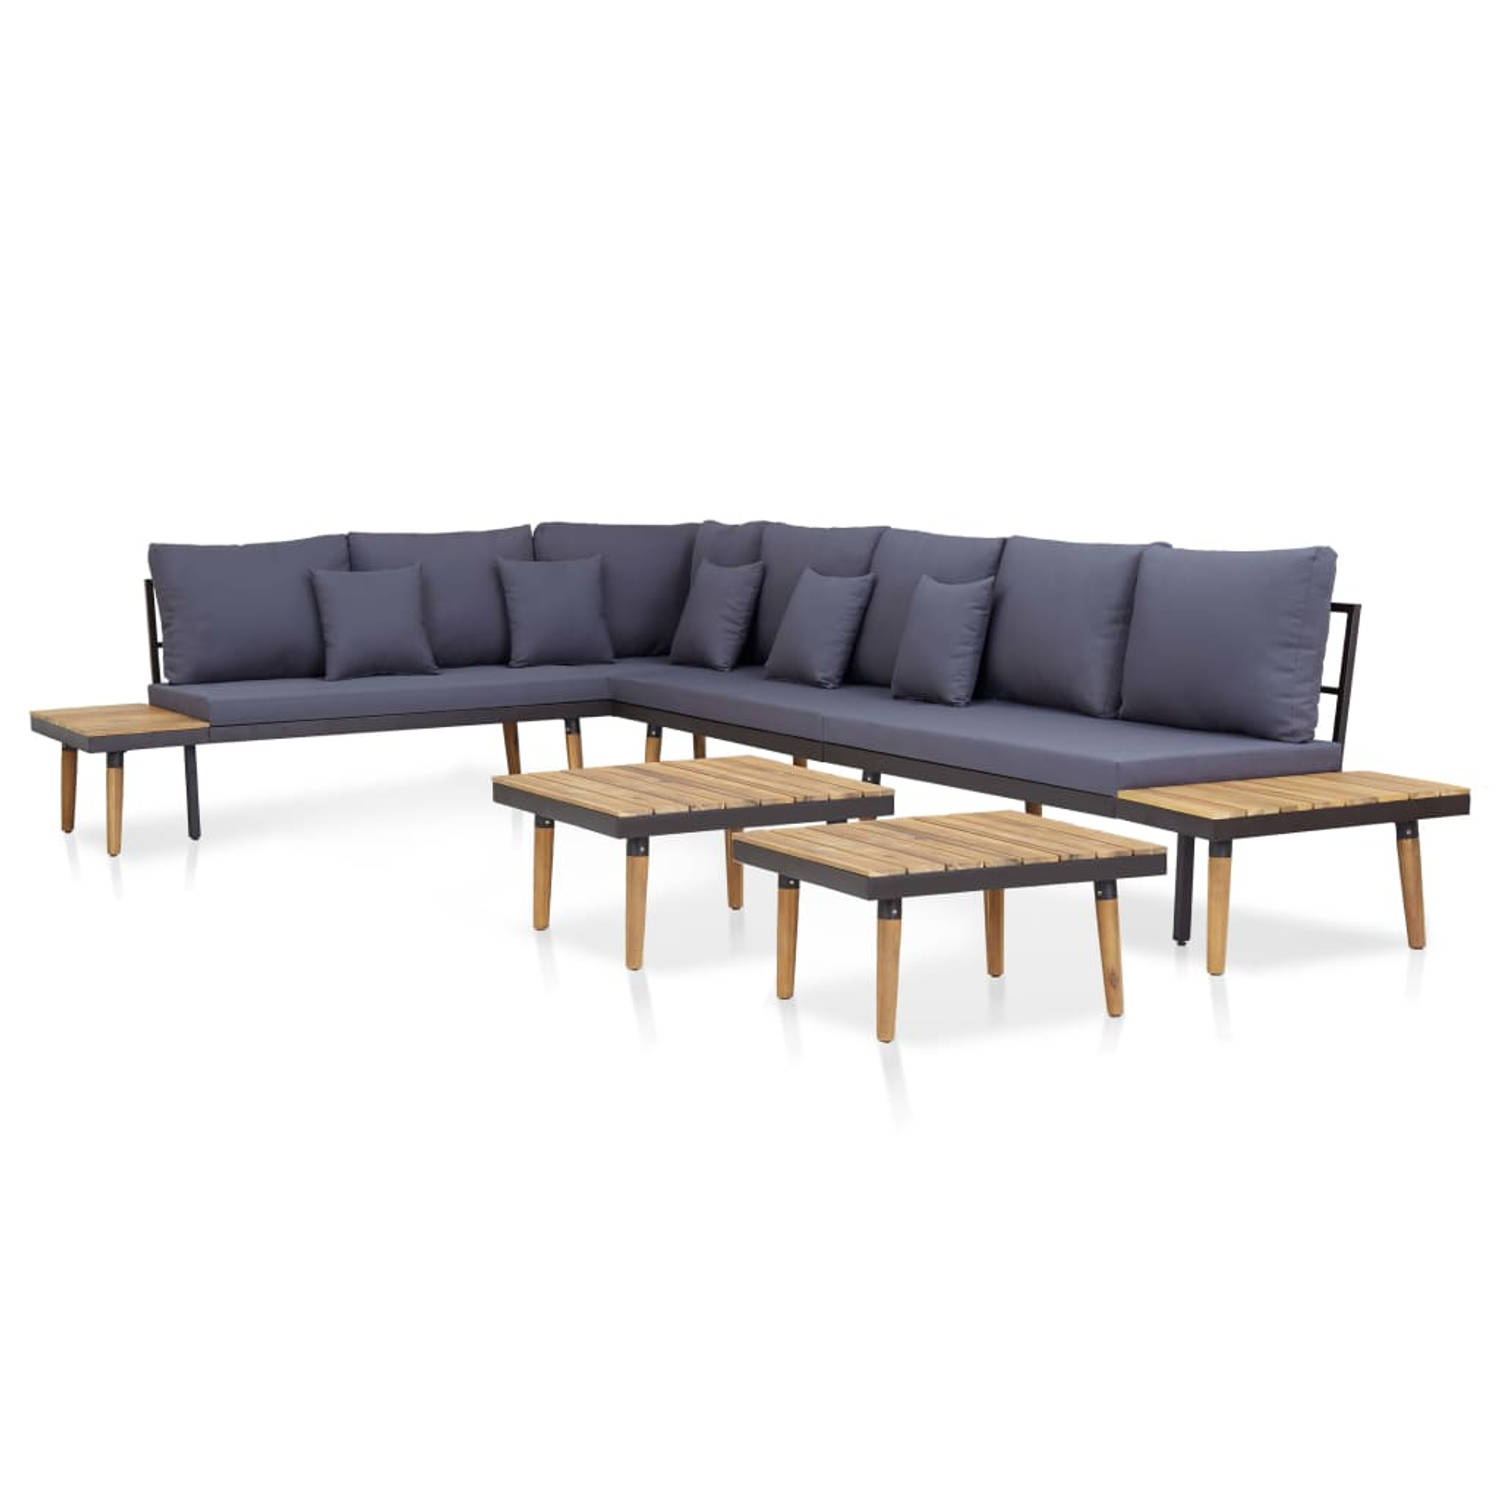 The Living Store Loungeset 7-zits - Acaciahout - Stalen frame - Comfortabele kussens - Bruin/donkergrijs - 310x200x65 cm